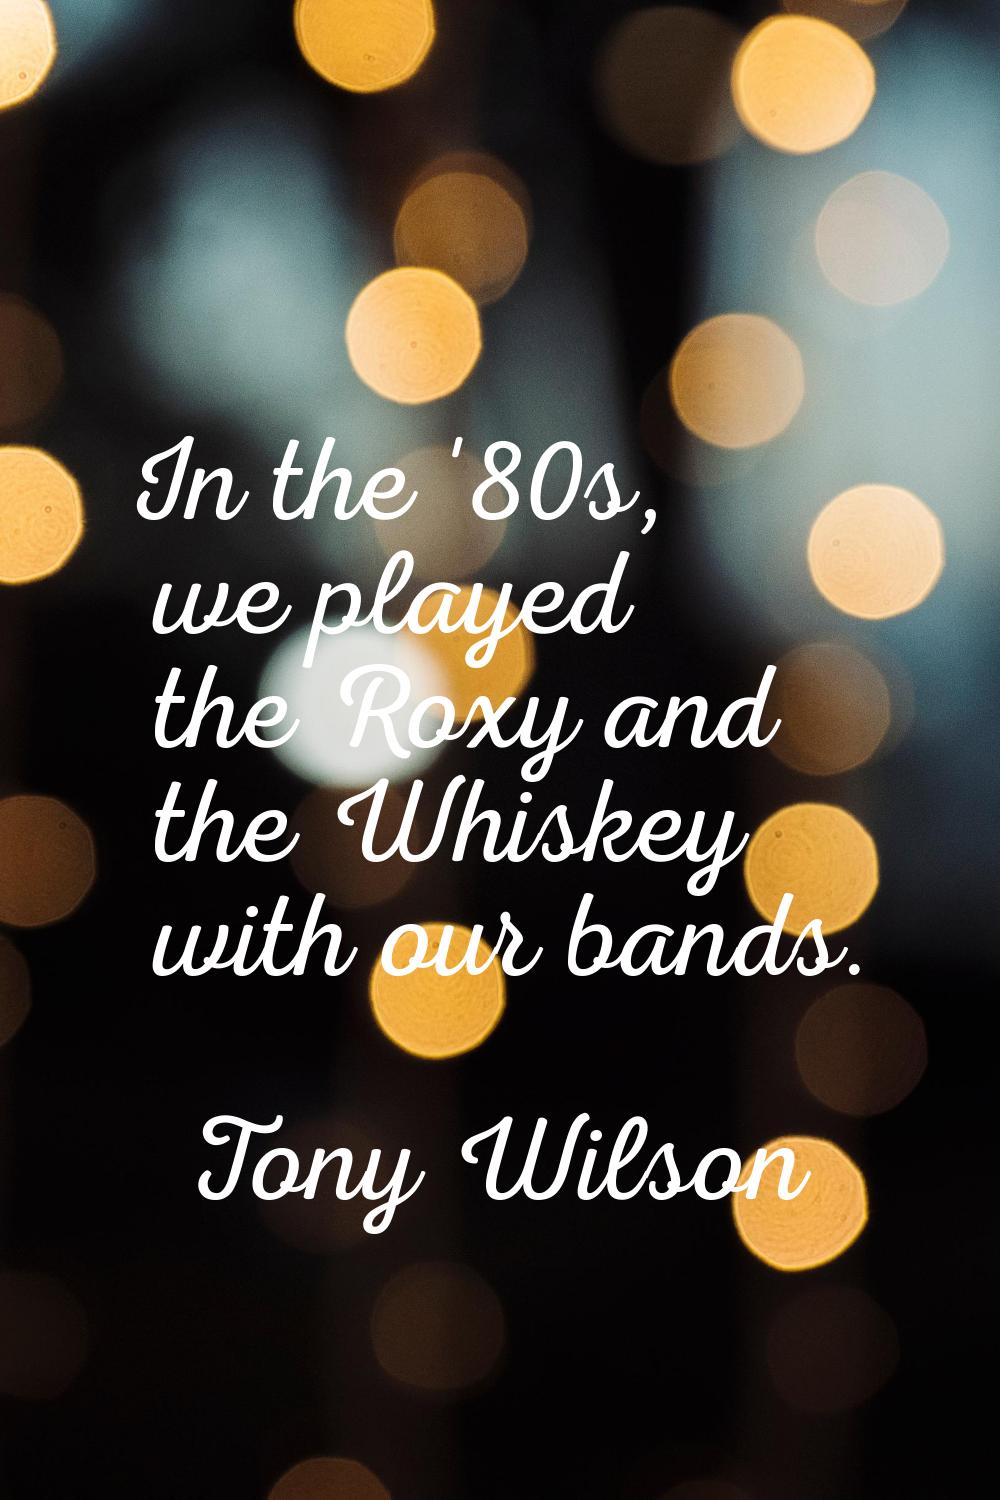 In the '80s, we played the Roxy and the Whiskey with our bands.